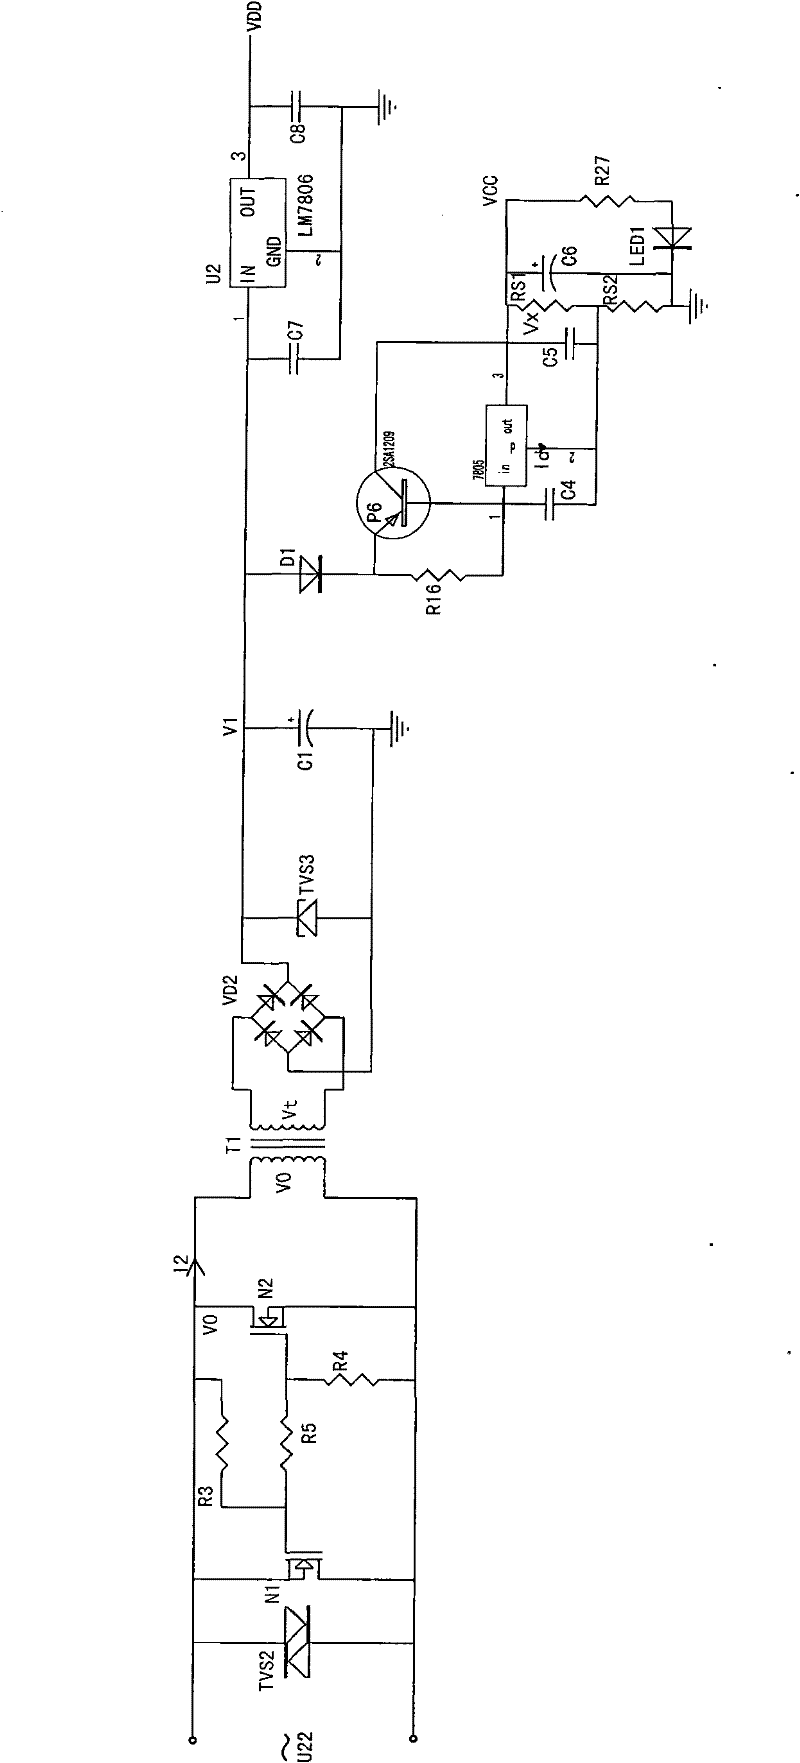 Energy acquisition and power supply management device of current transformer of overhead line